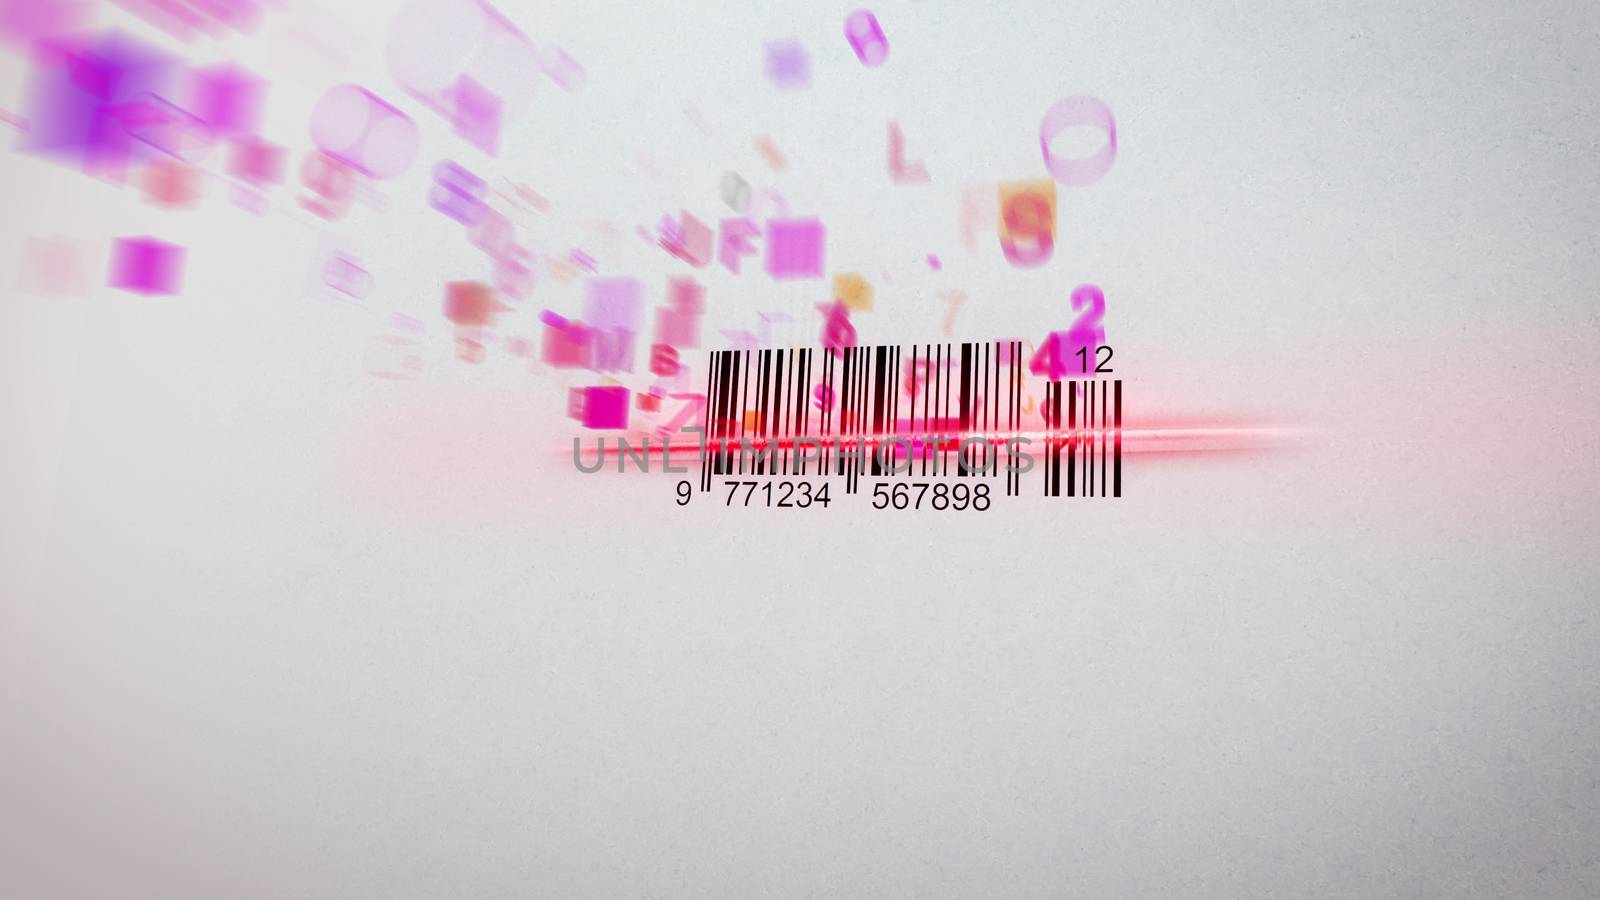 Wonderful 3d rendering of an abstract Barcode scanning process with spinning symbols, numbers, figures of violet, orange and pink colors. F,S, 2,4, are rushing over the black and white code